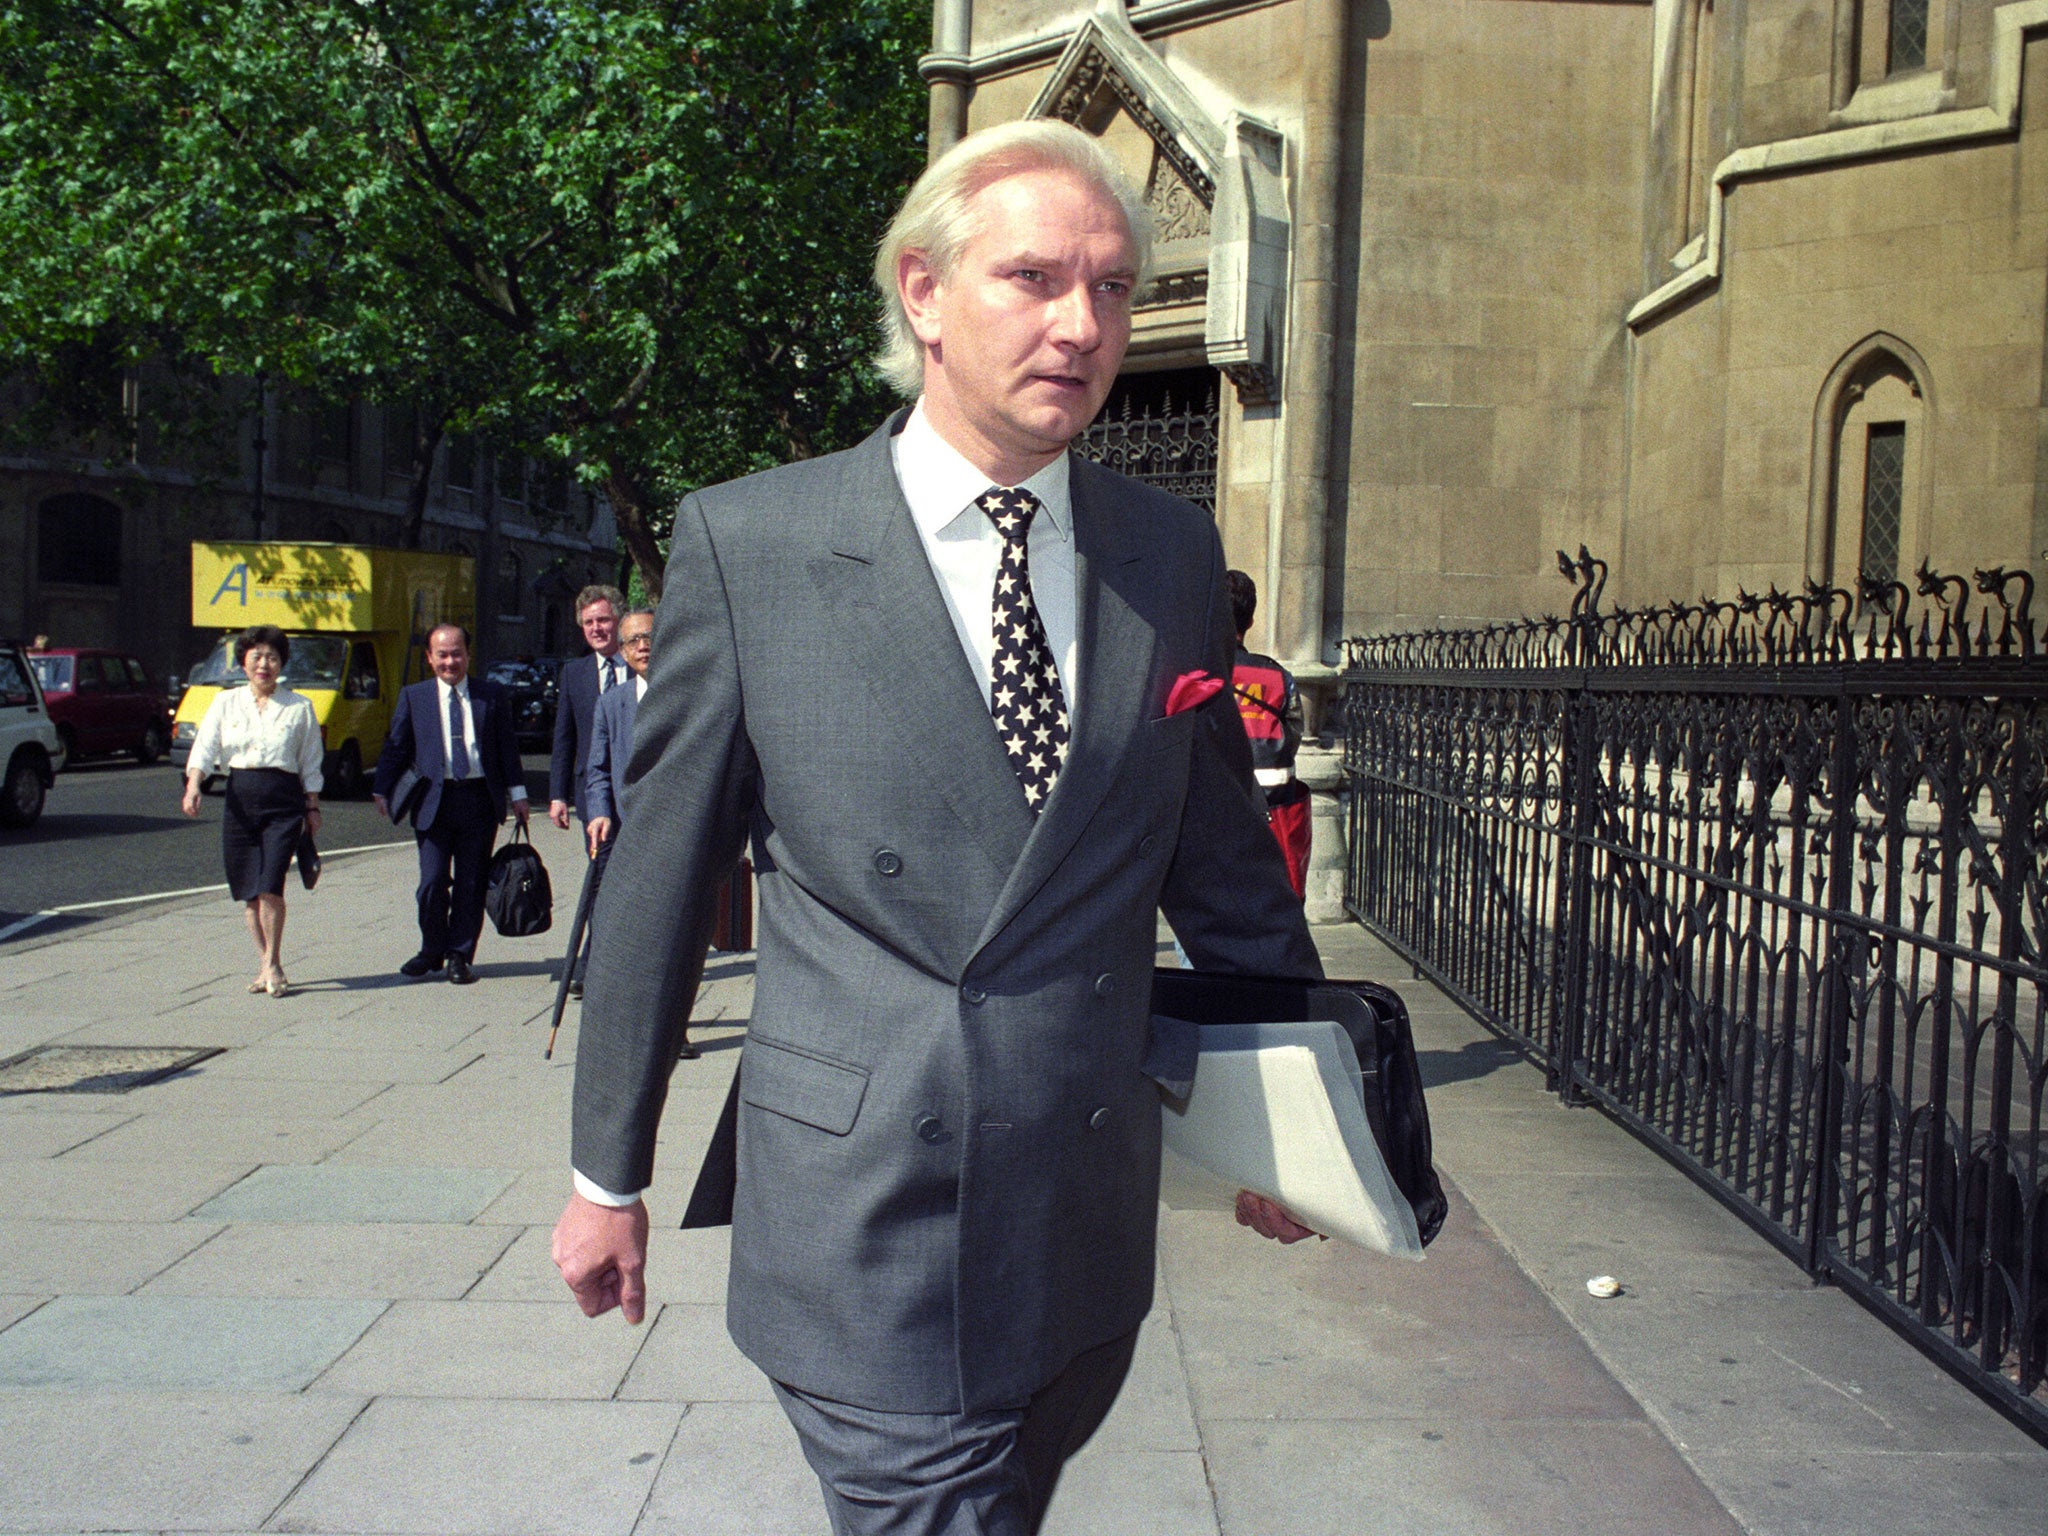 File photo from 29 July 1991 showing the former Conservative MP Harvey Proctor arriving at the High Court in London